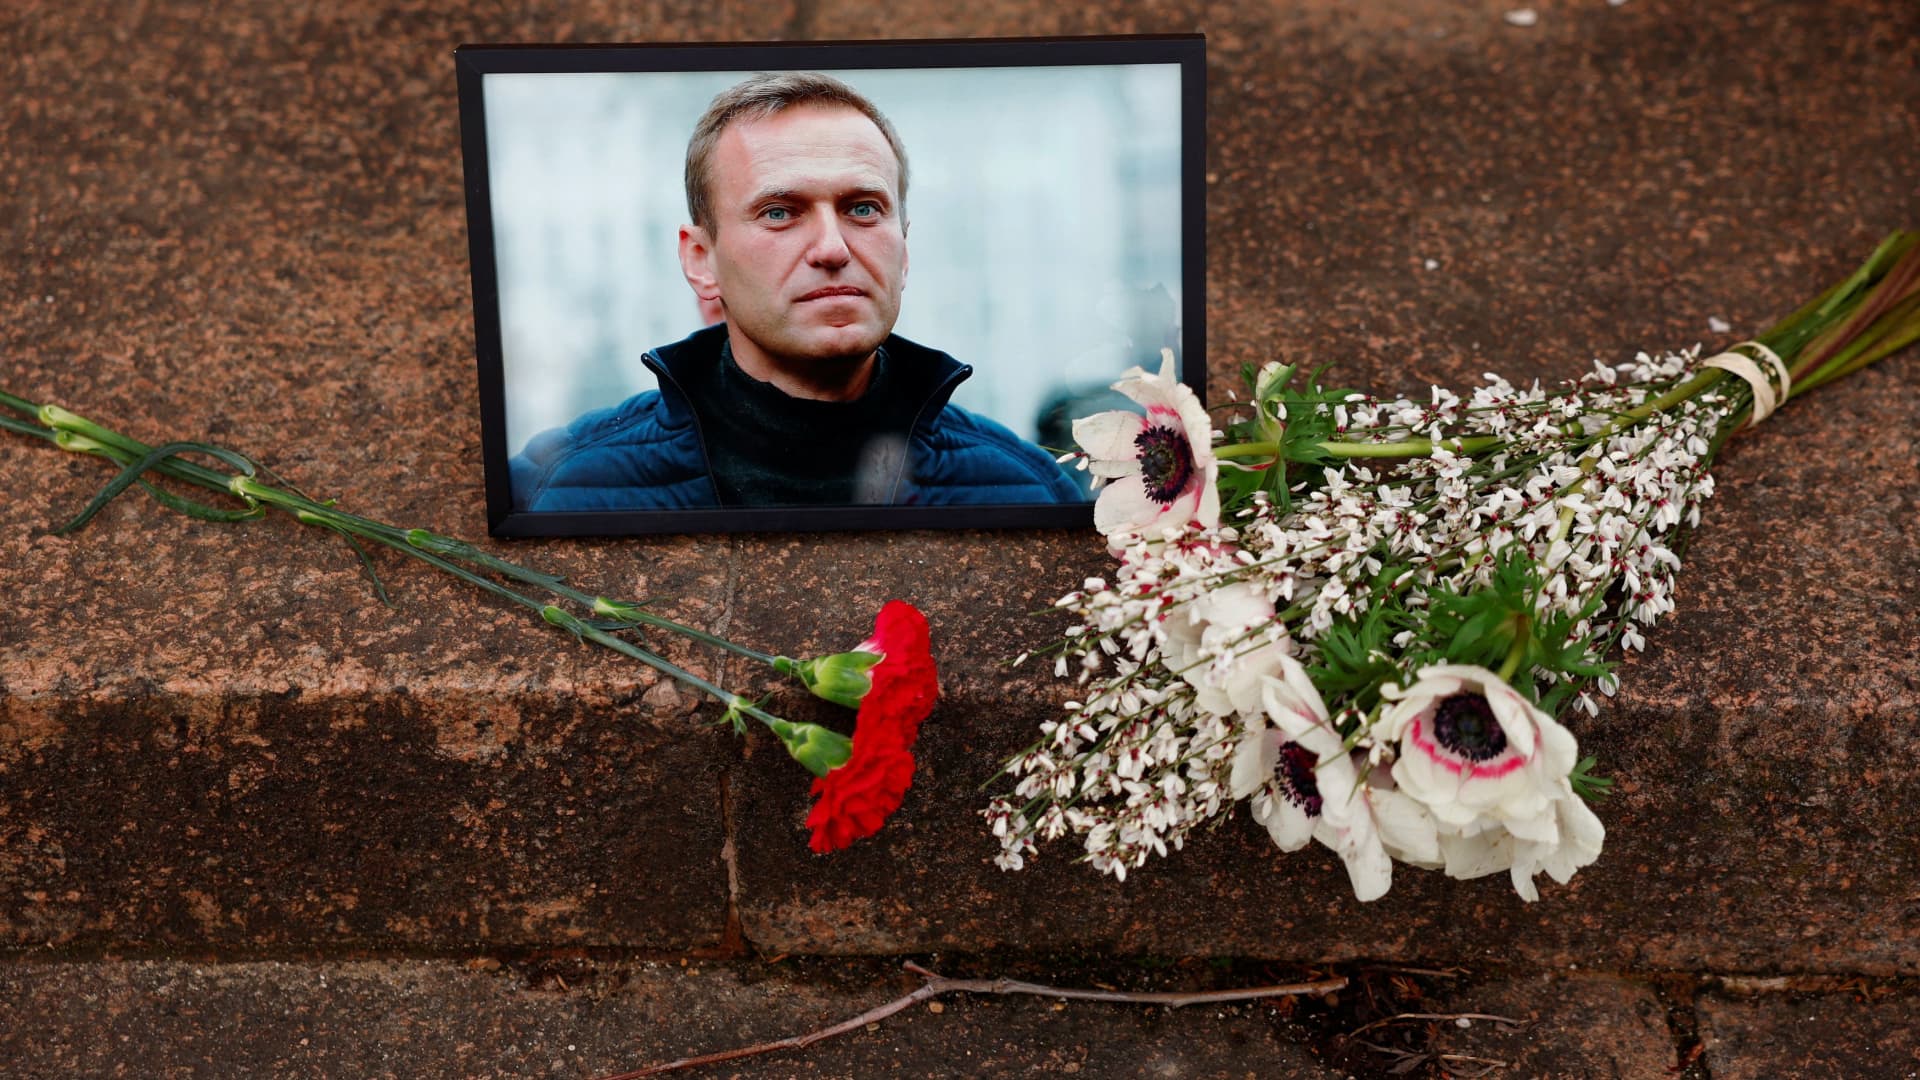 White House to expand Russia sanctions over Alexei Navalny’s death